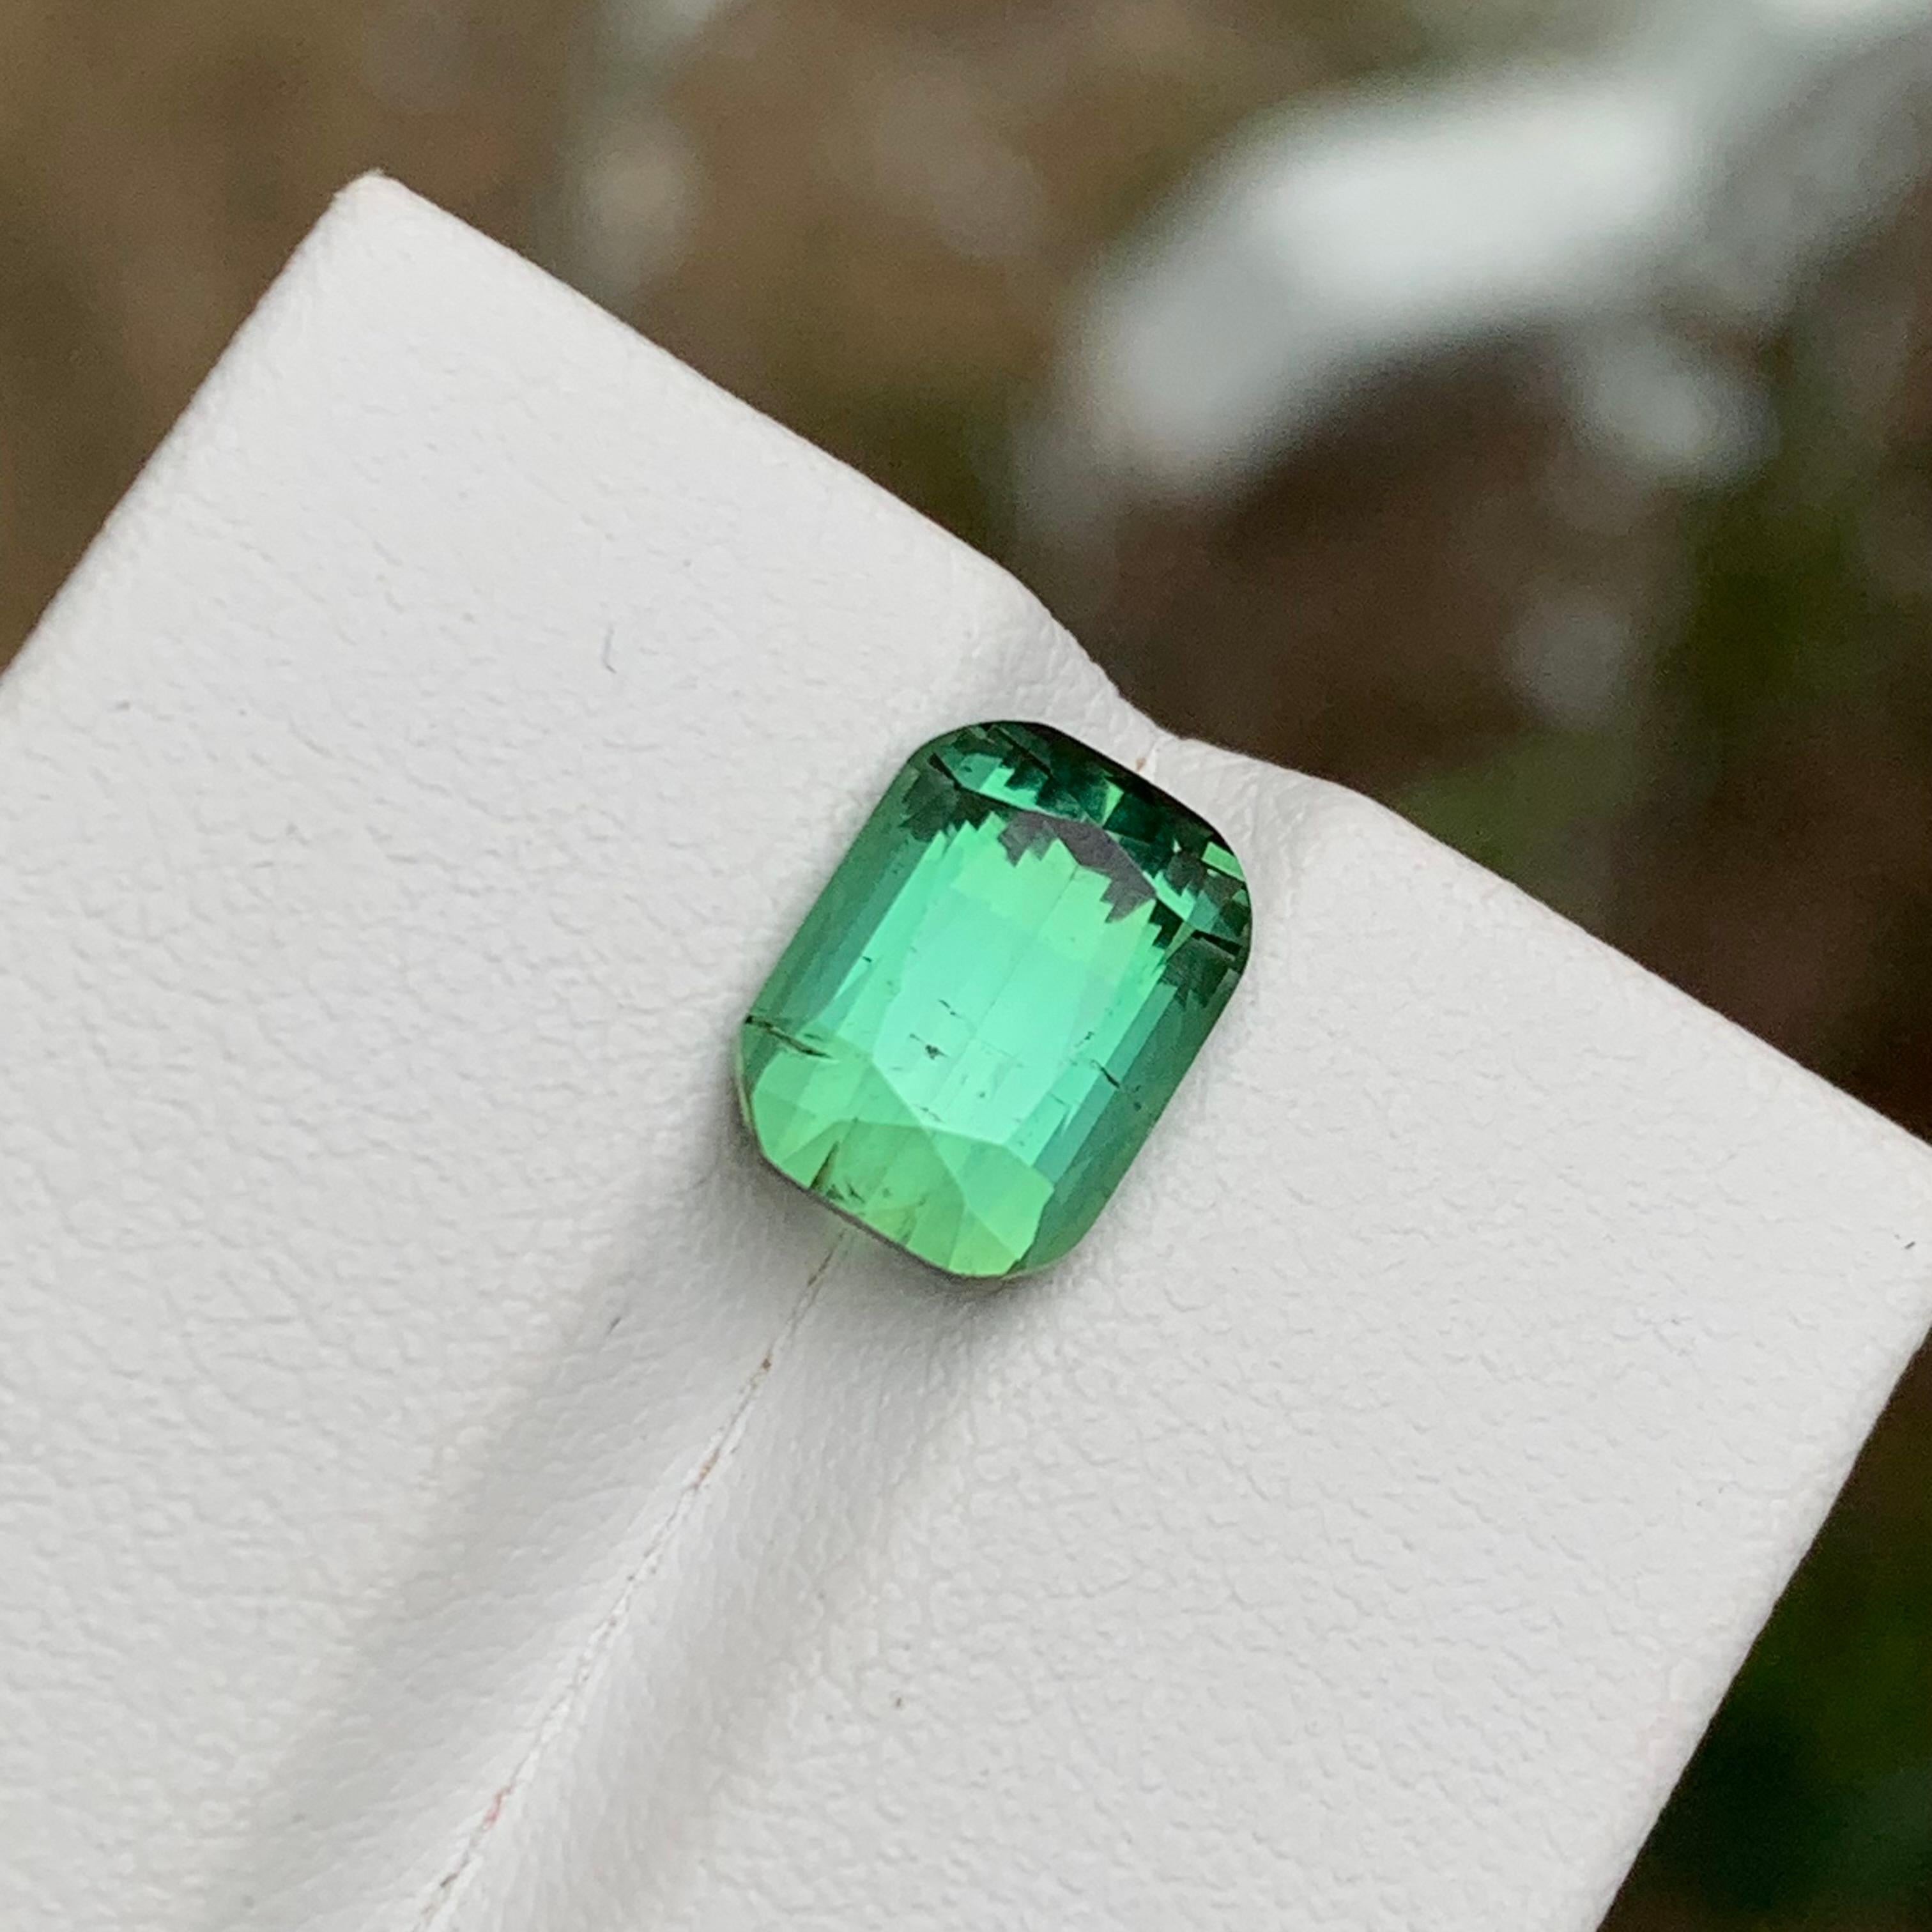 Rare Mint Green Natural Tourmaline Gemstone, 3.85 Ct Cushion Cut-Ring/Jewelry  For Sale 5